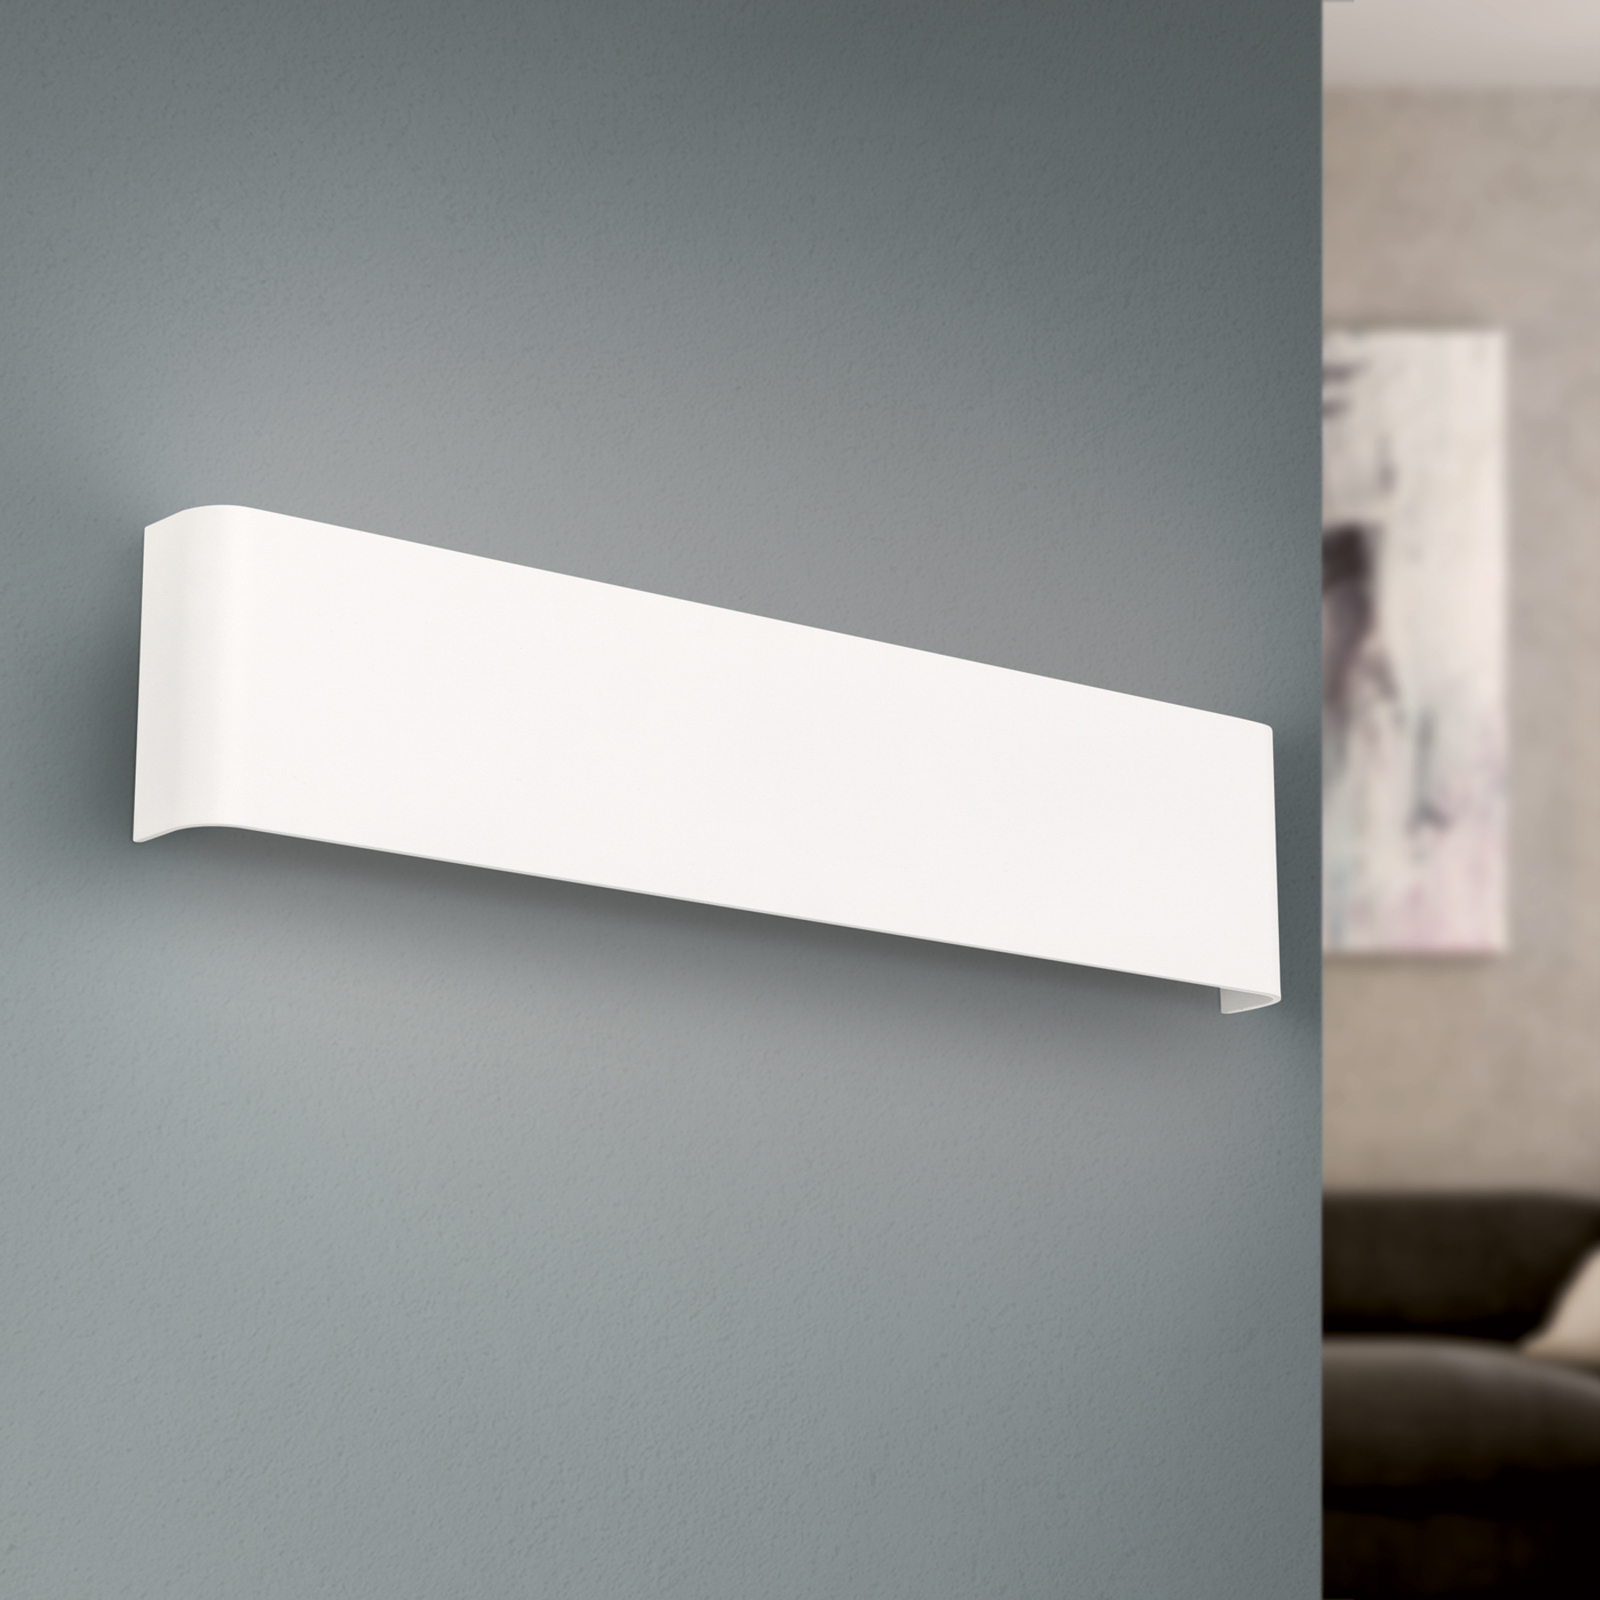 Accent LED wall light with up/downlight, white